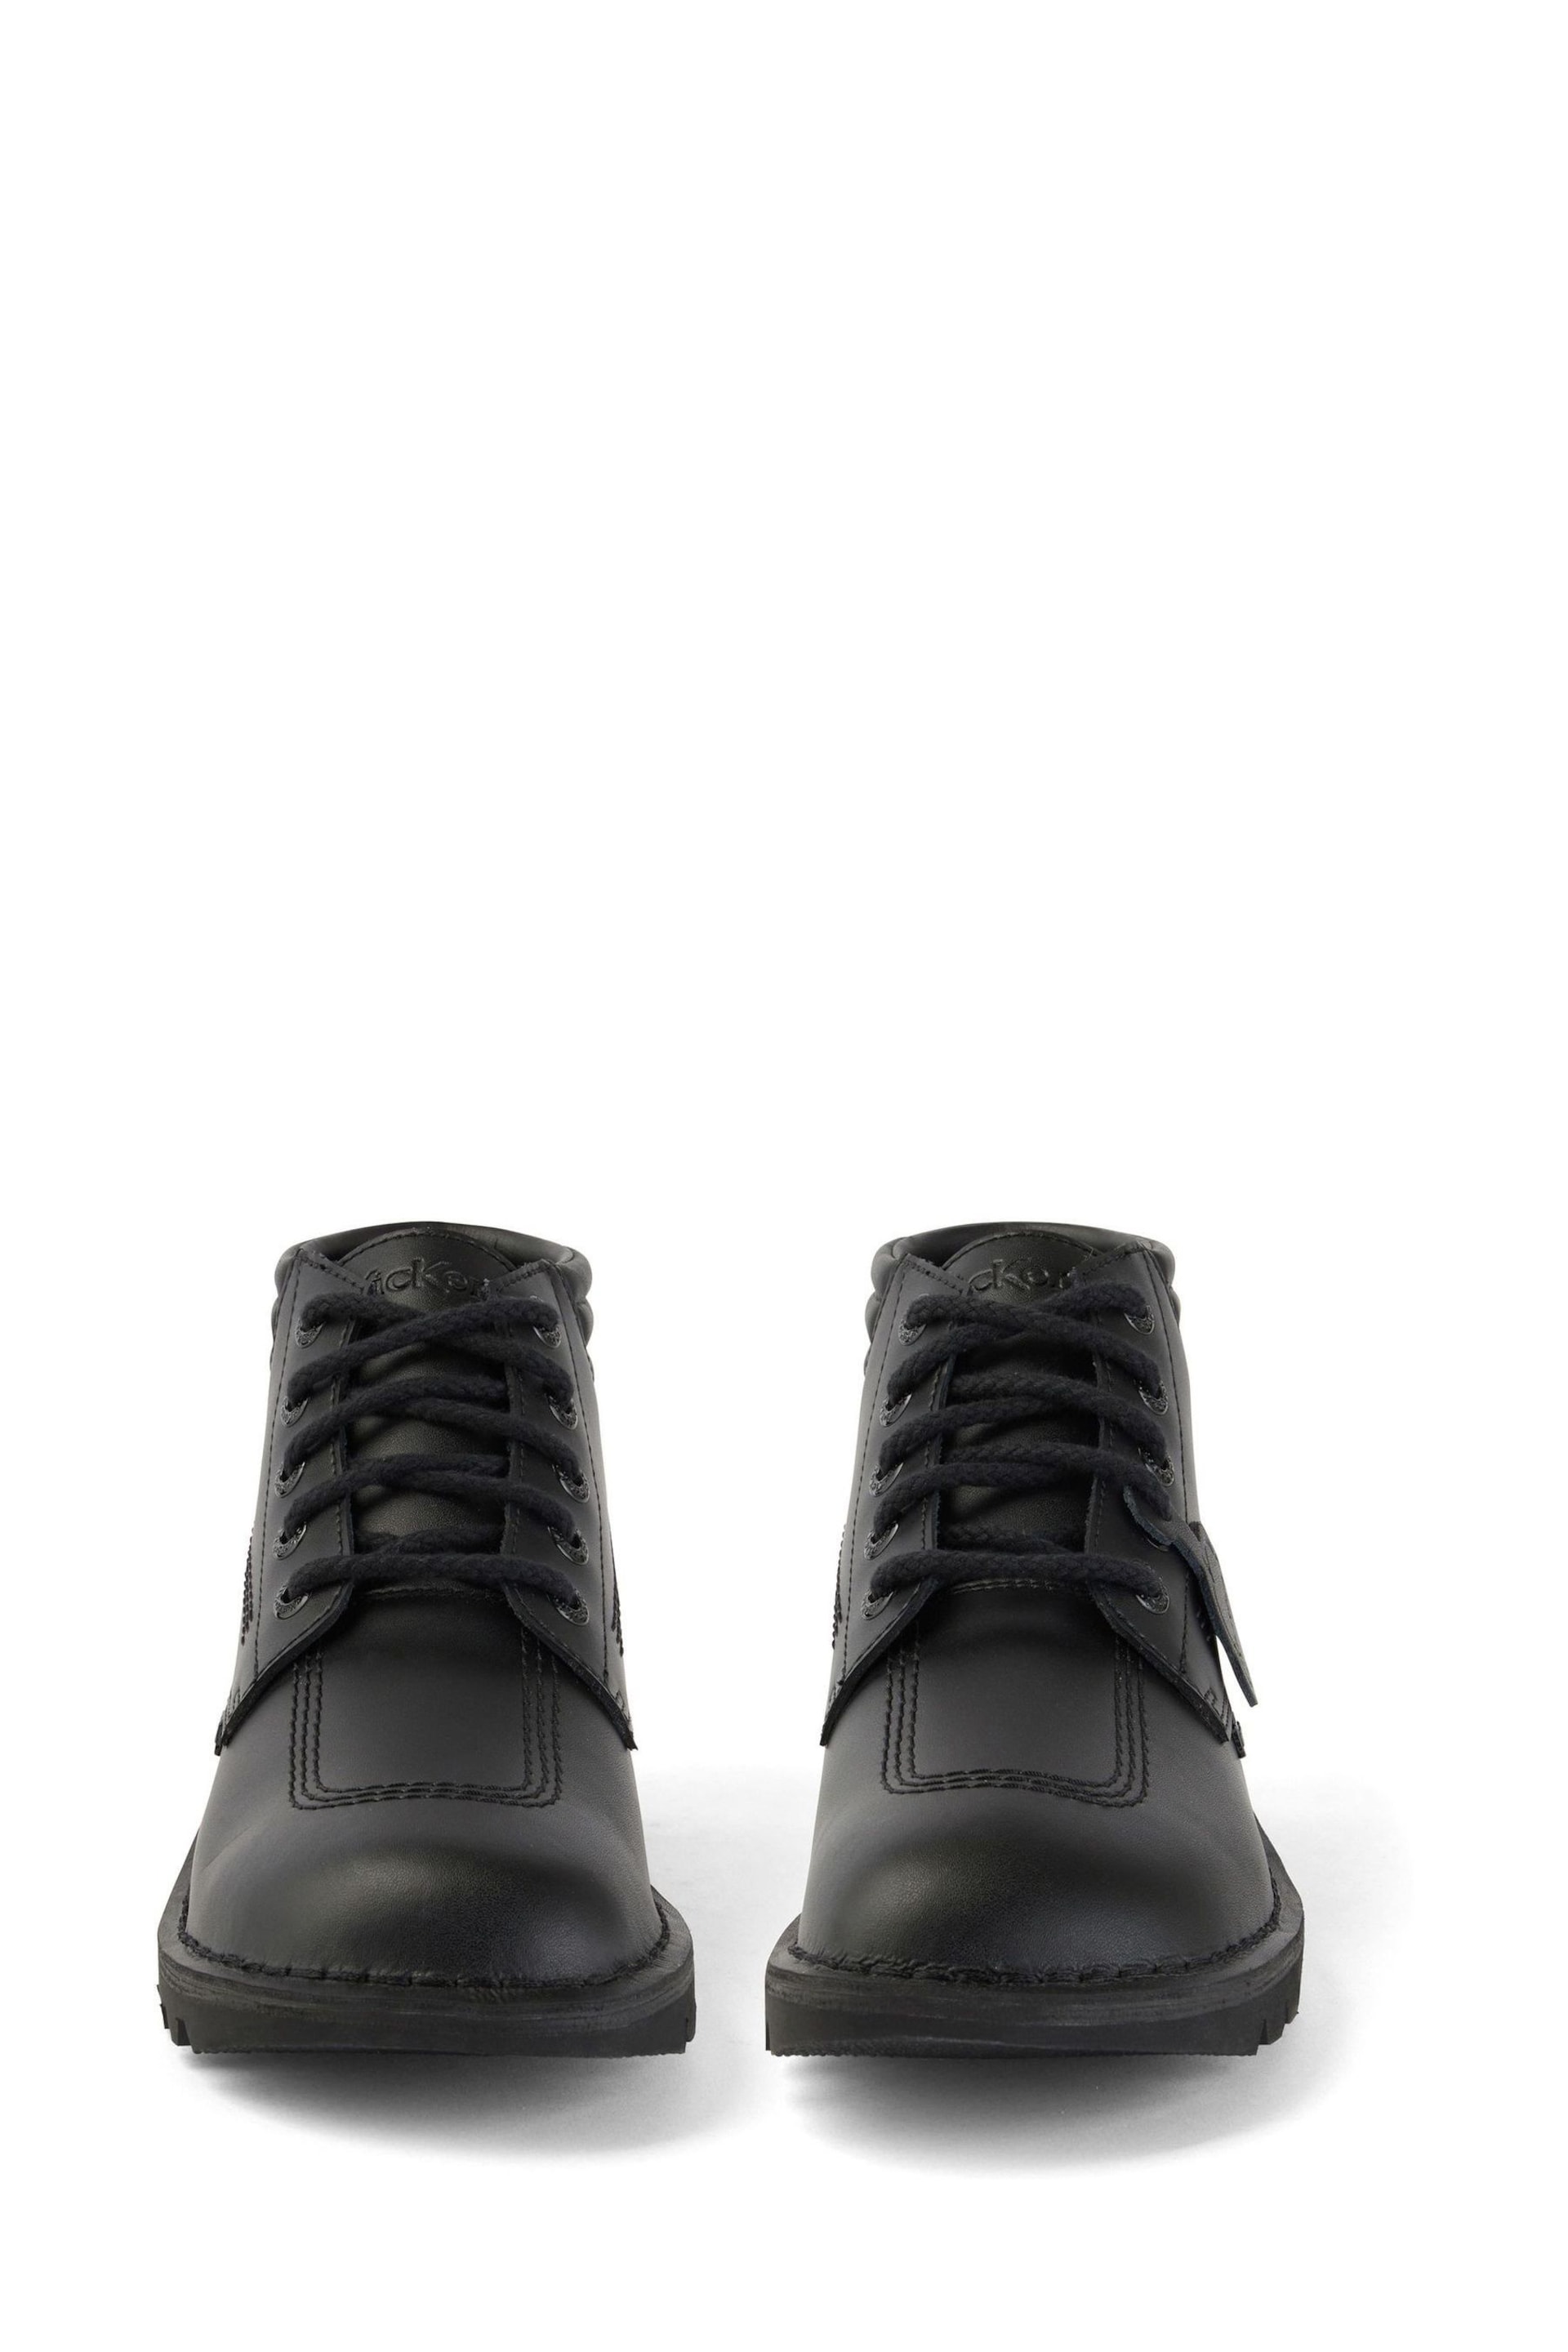 Kickers Kick Hi Padded Leather Boots - Image 5 of 6